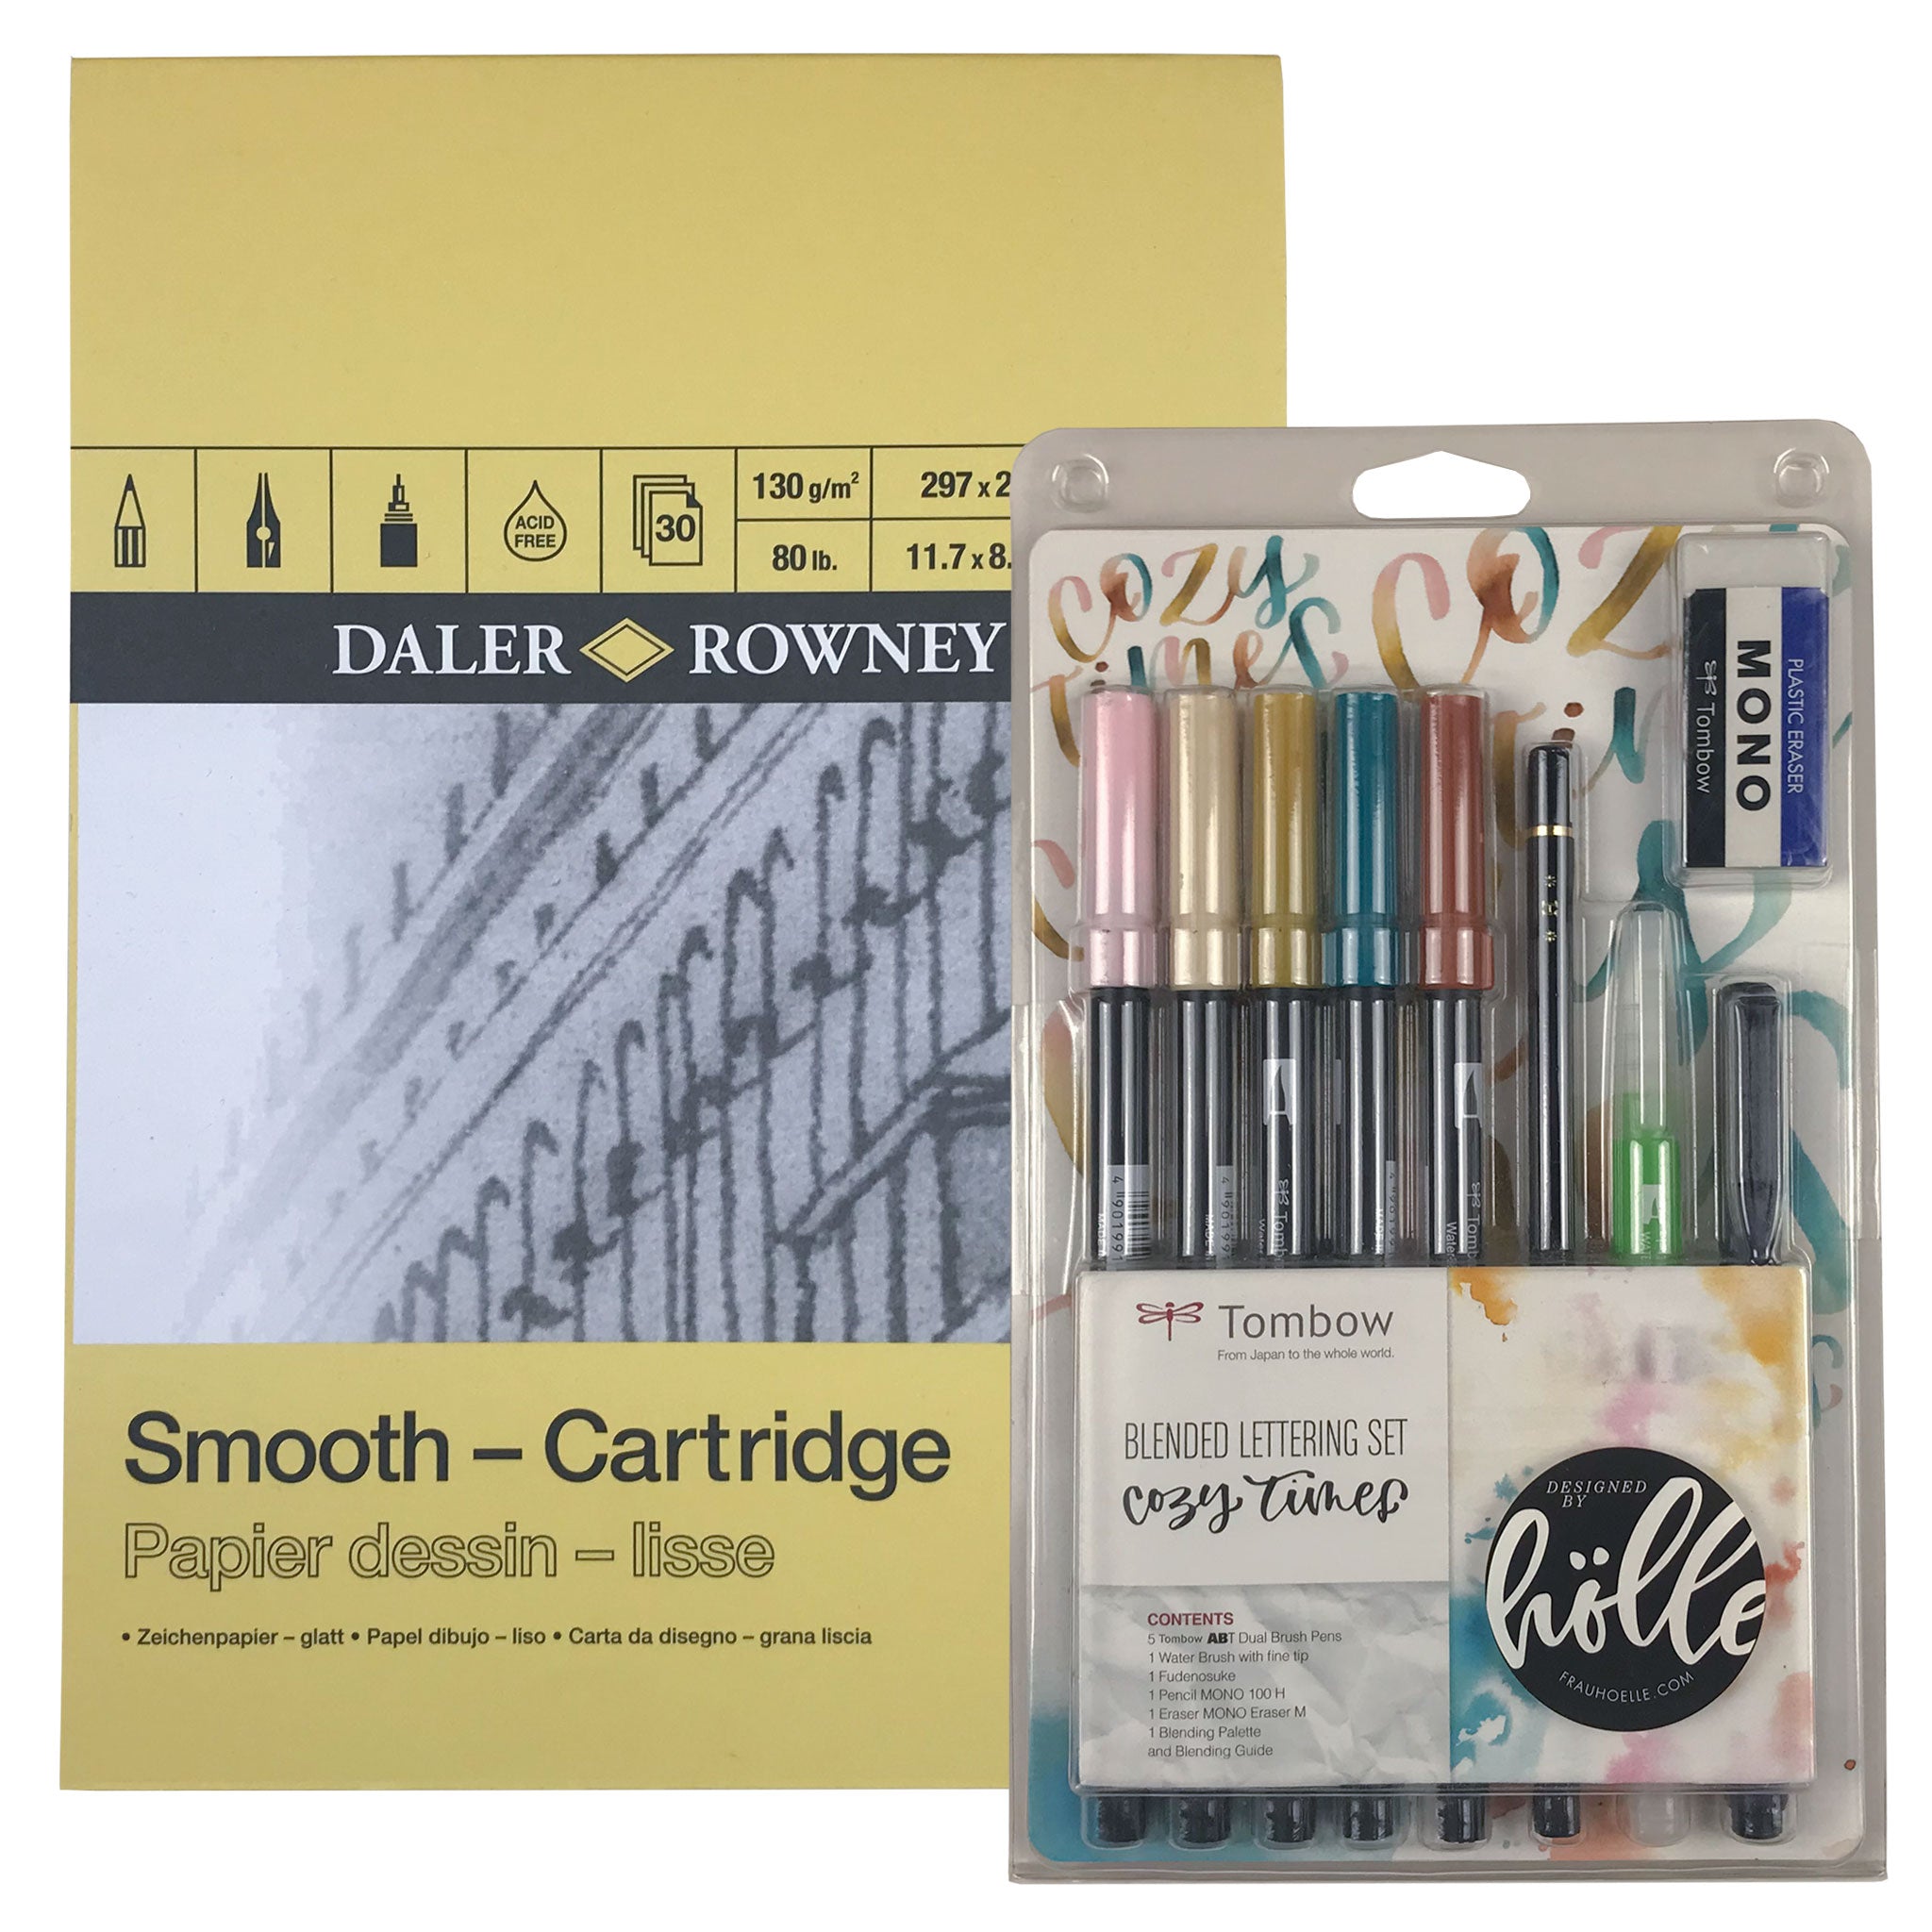 Tombow Lettering Sets